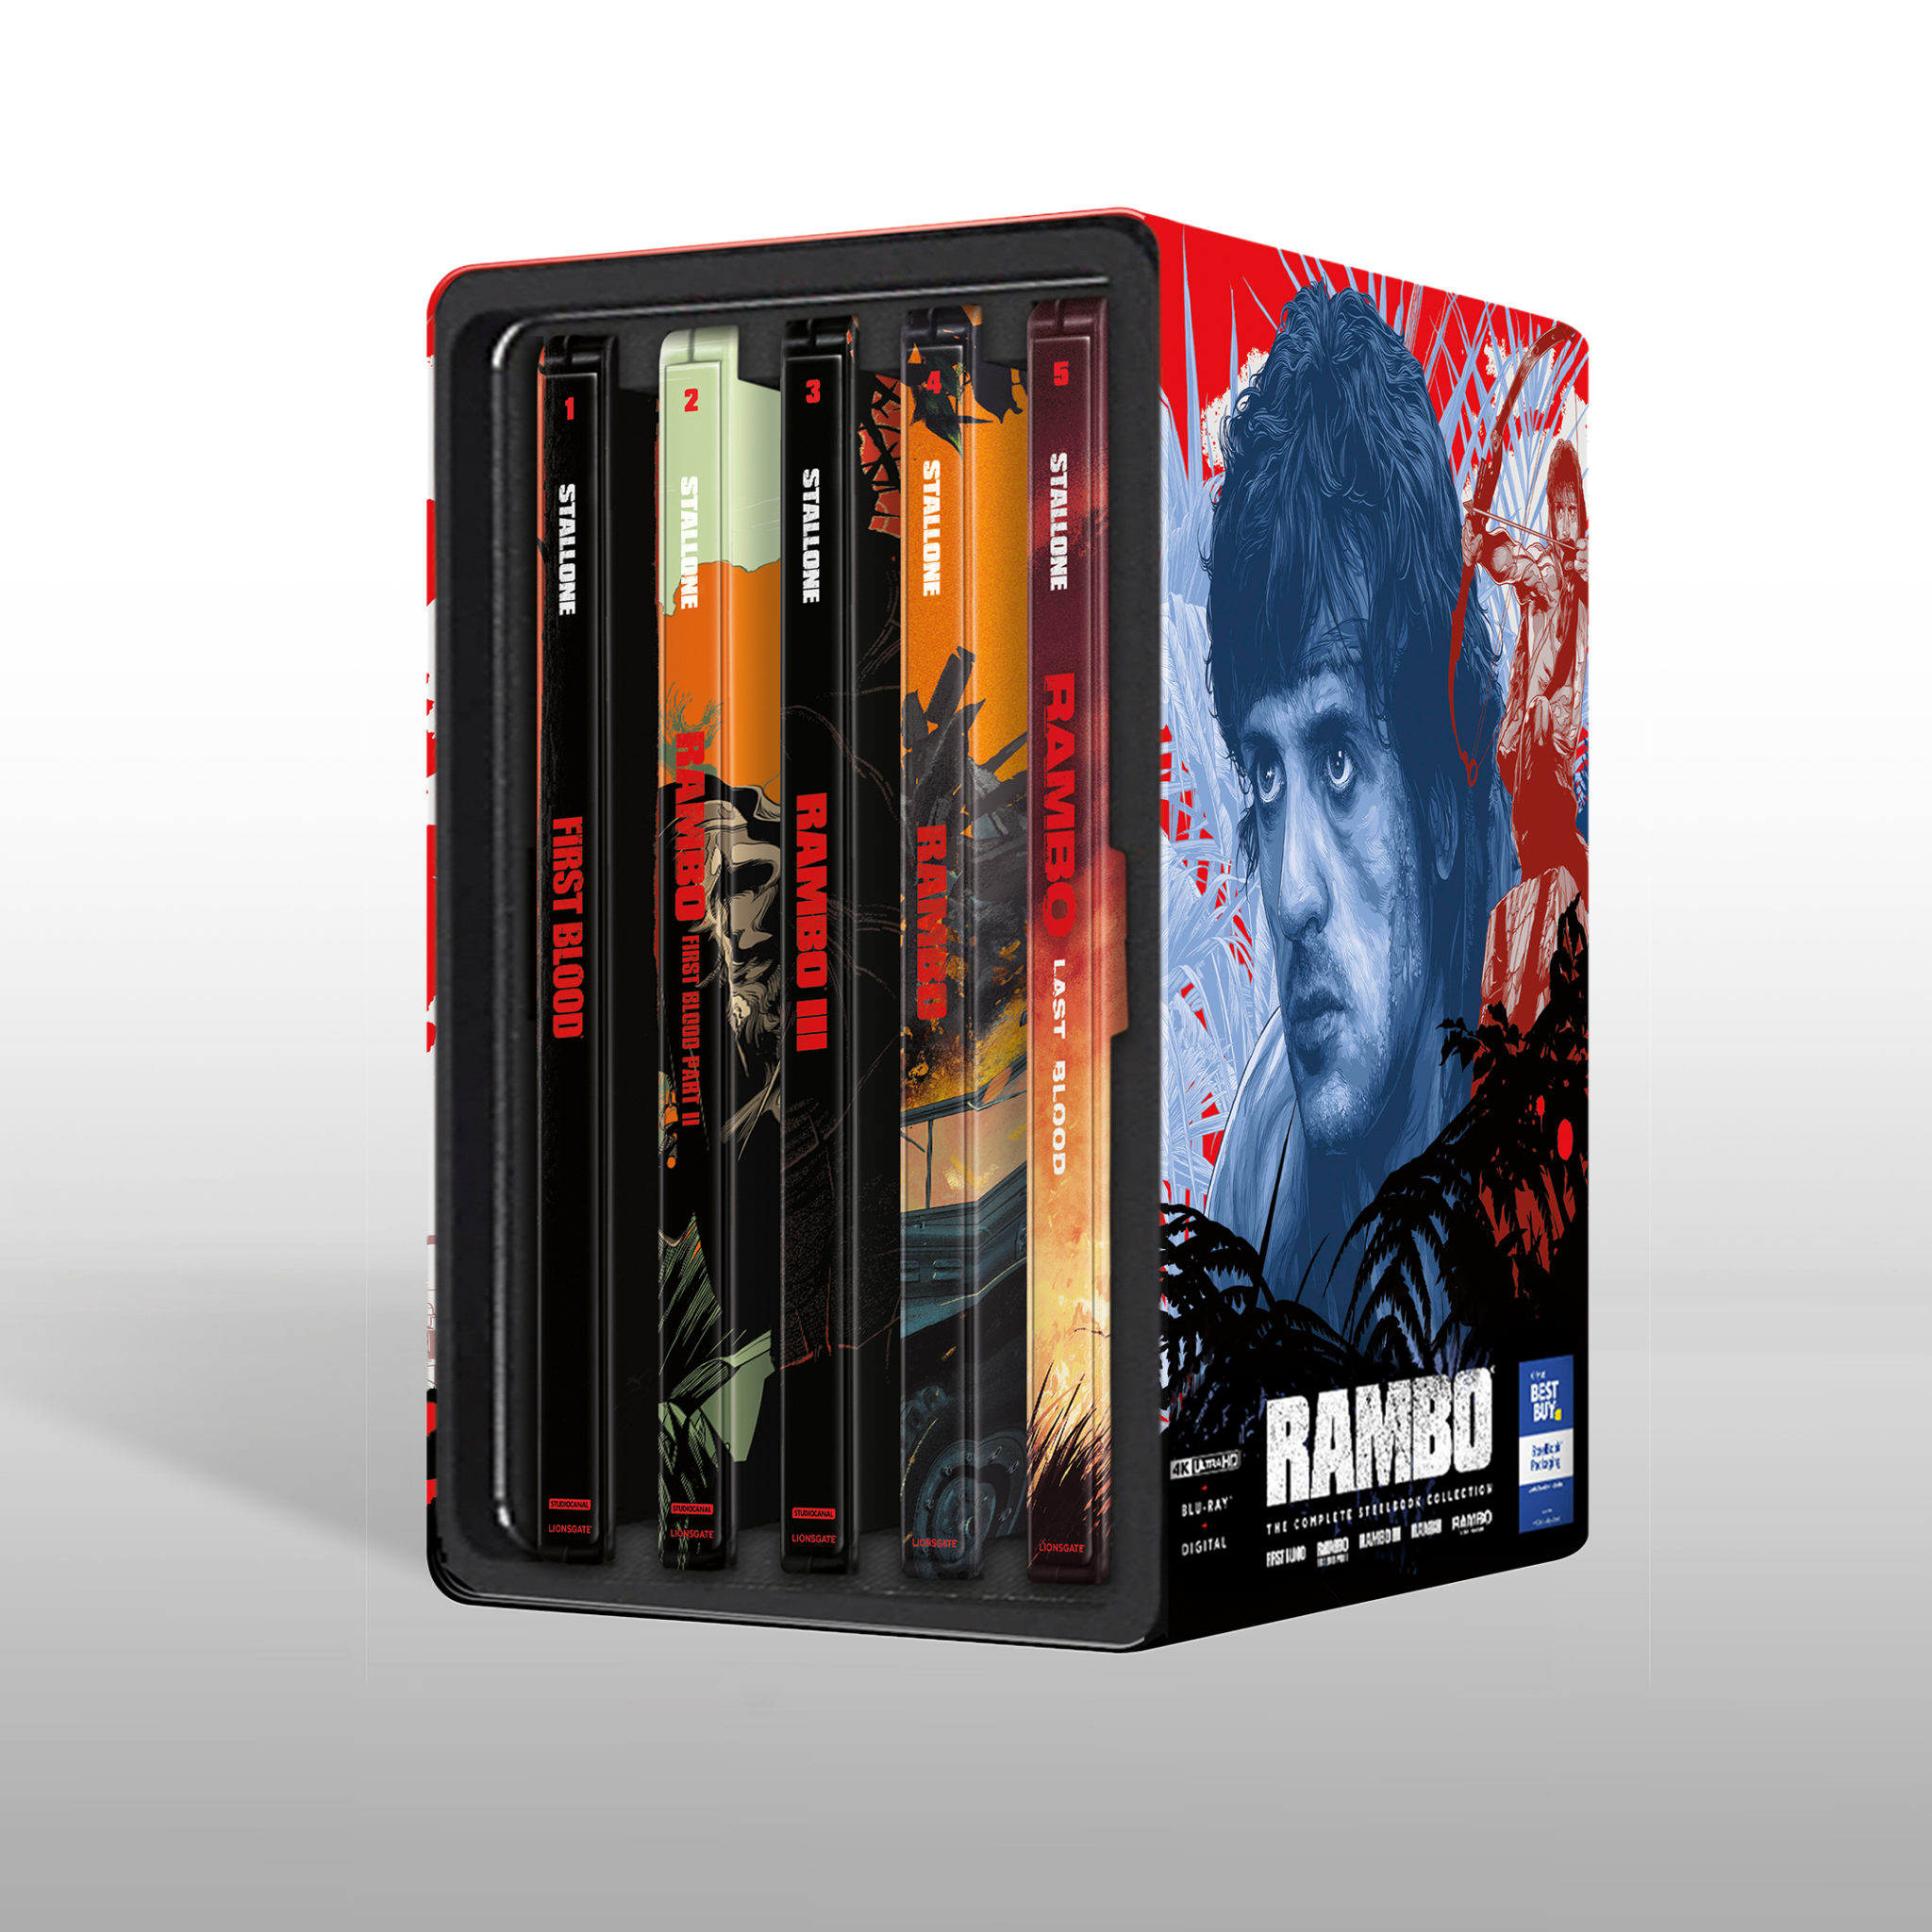 Holiday T Guide Rambo The Complete Steelbook Collection Lrm